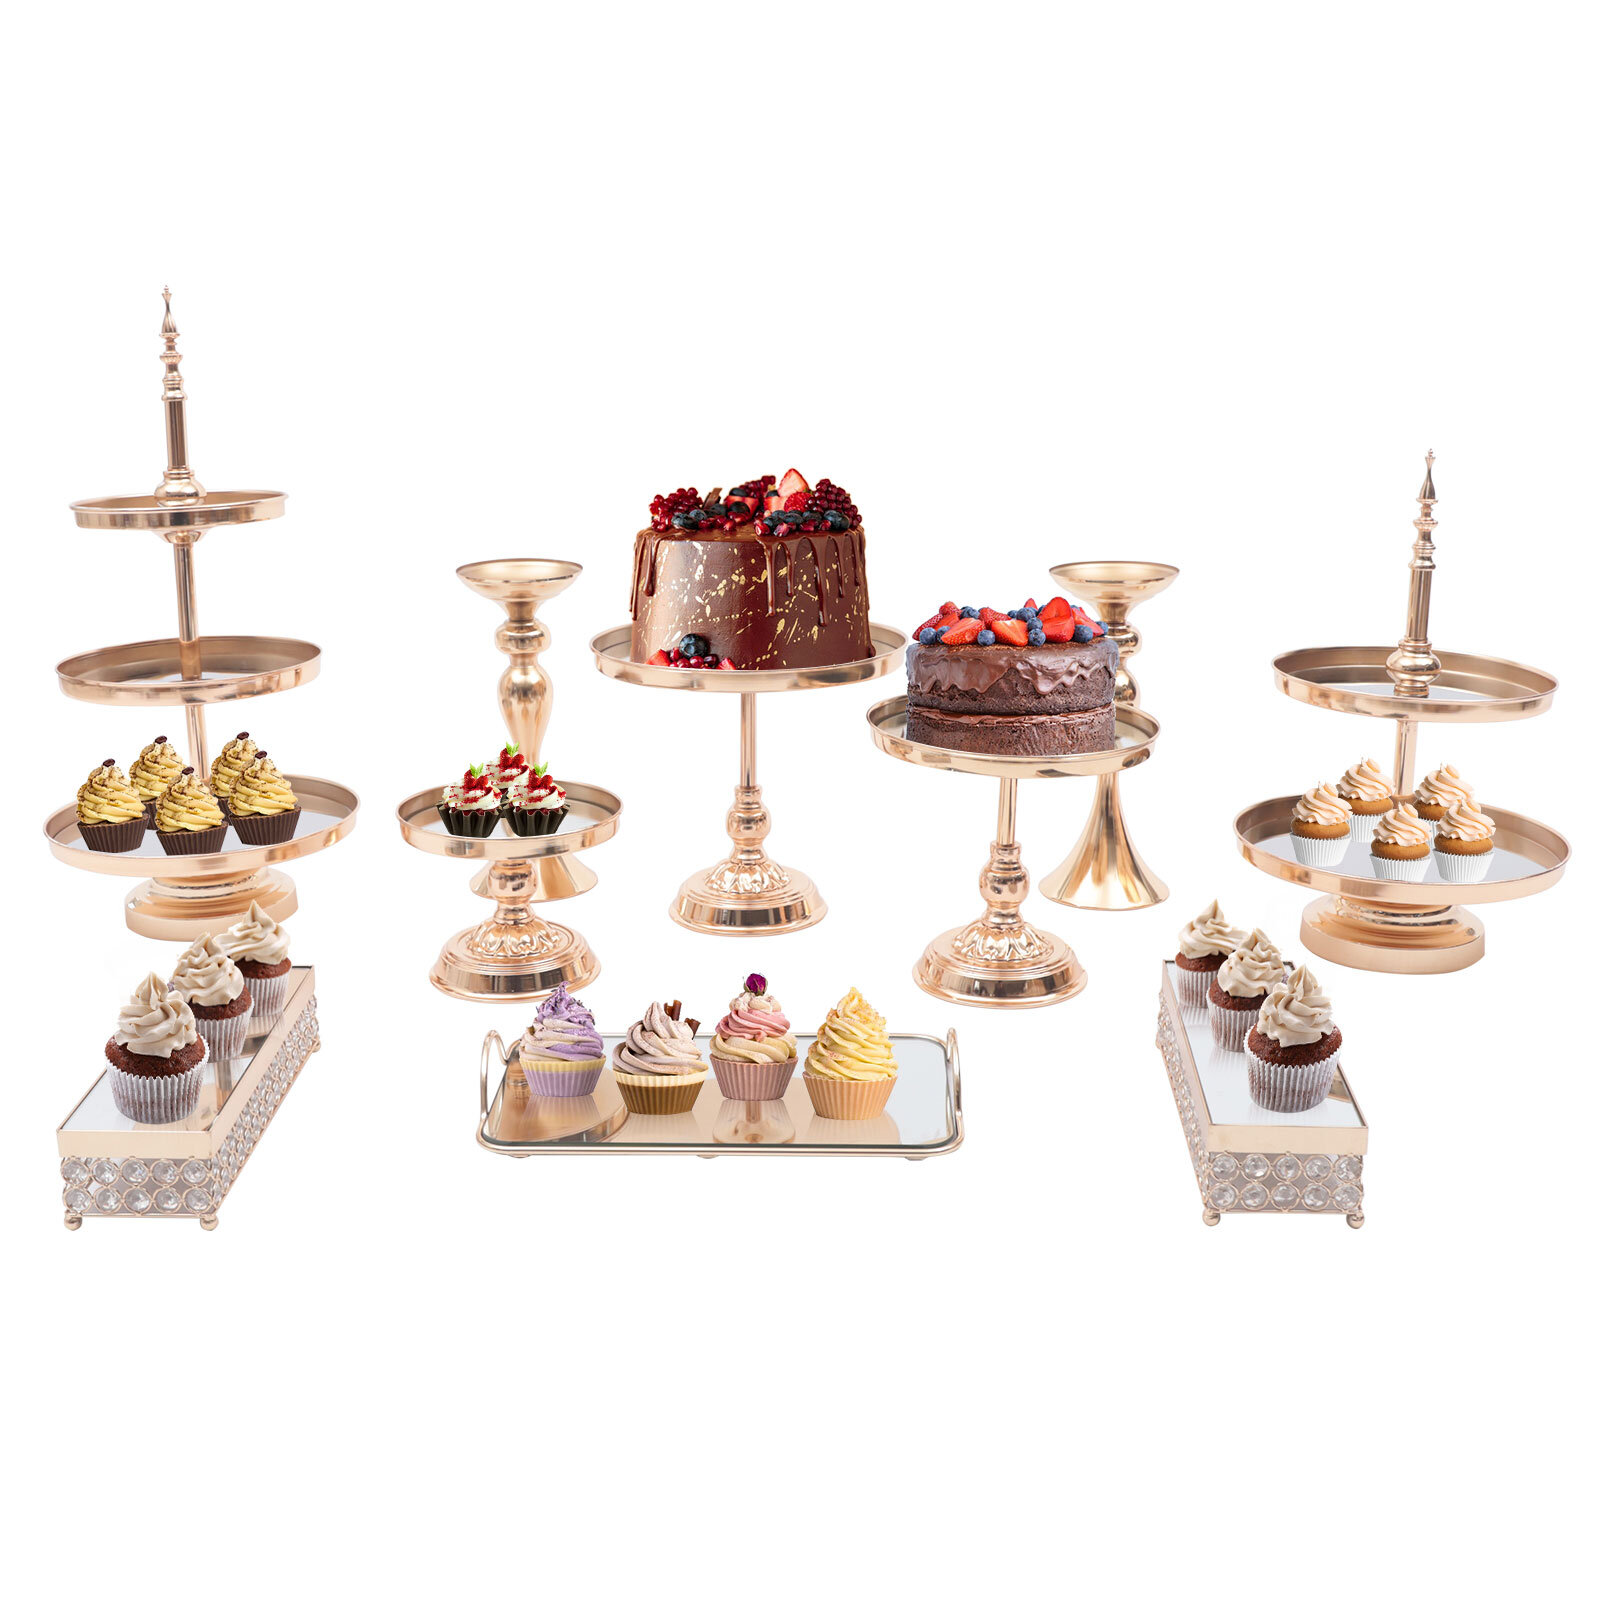 3 Tier Clear Cake Stand, Acrylic Cake Stand Riser, Display Stand for Cakes,  Food Display, Cupcake Holder, Wedding Sweet Stand 